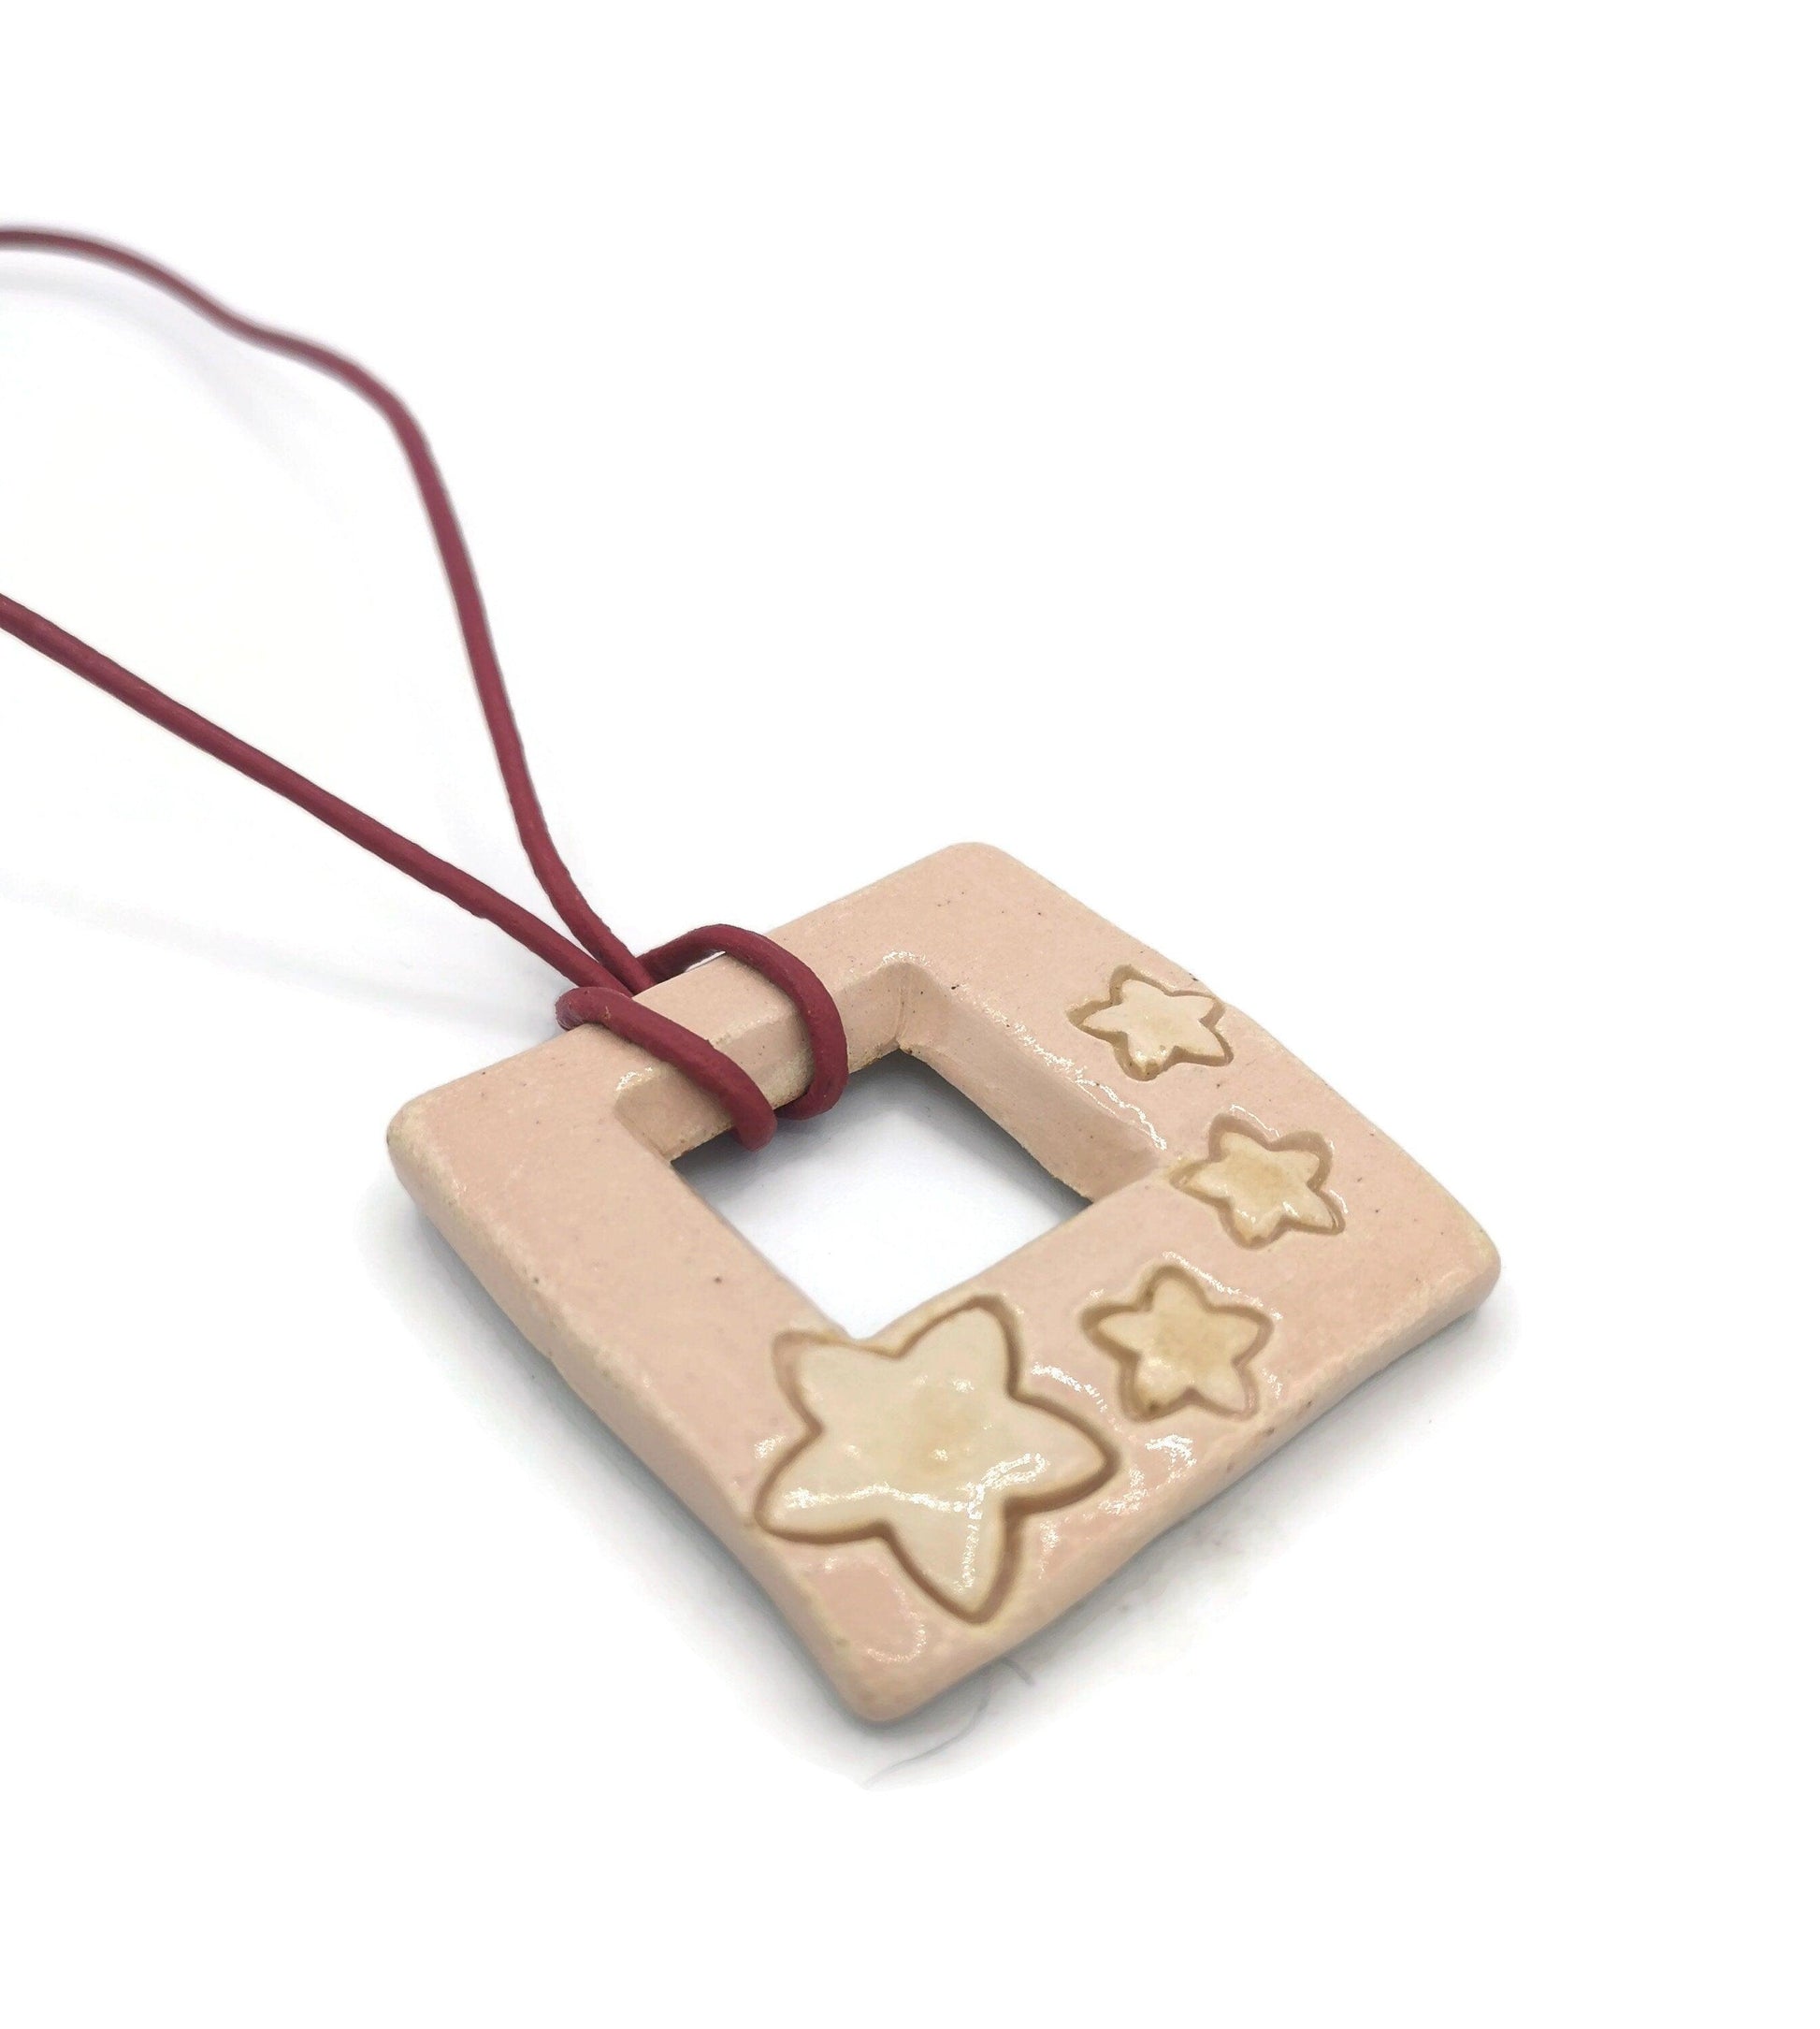 1Pc 50mm Extra Large Square Ceramic Necklace Pendant For Jewelry Making, Handmade Beige Clay Charms, Unique Statement Jewelry Components - Ceramica Ana Rafael